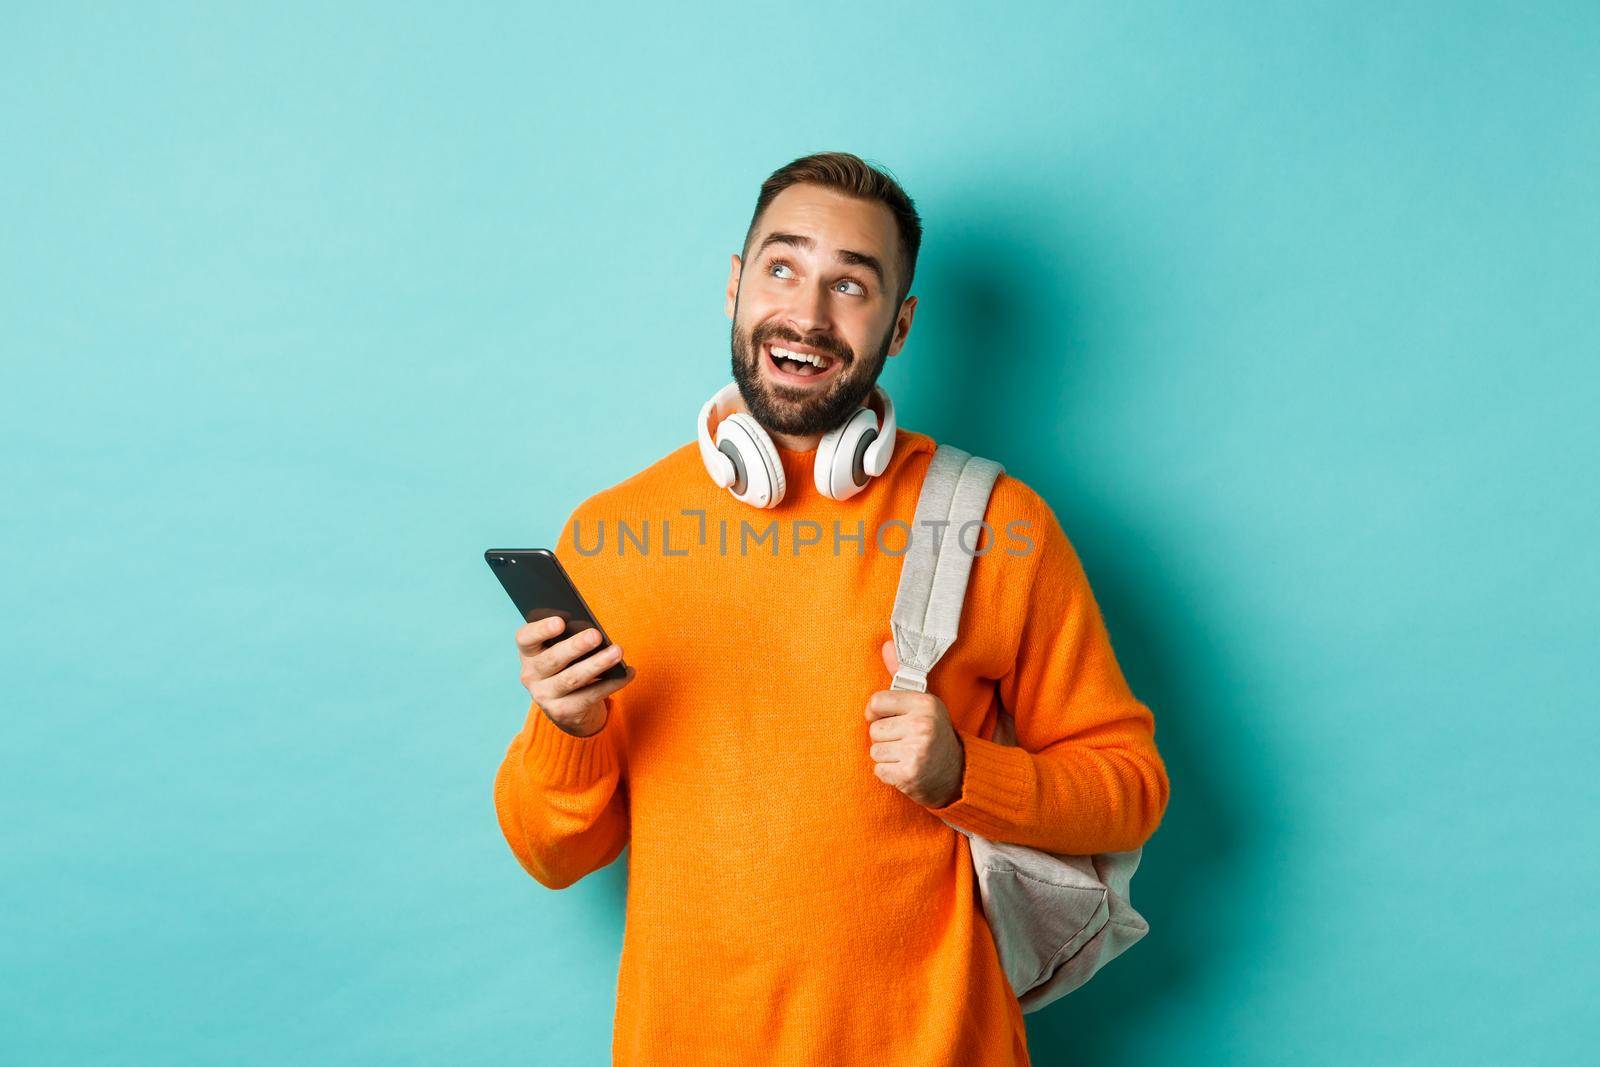 Image of handsome young man with backpack and headphones, imaging or thinking while using smartphone, standing over light blue background.